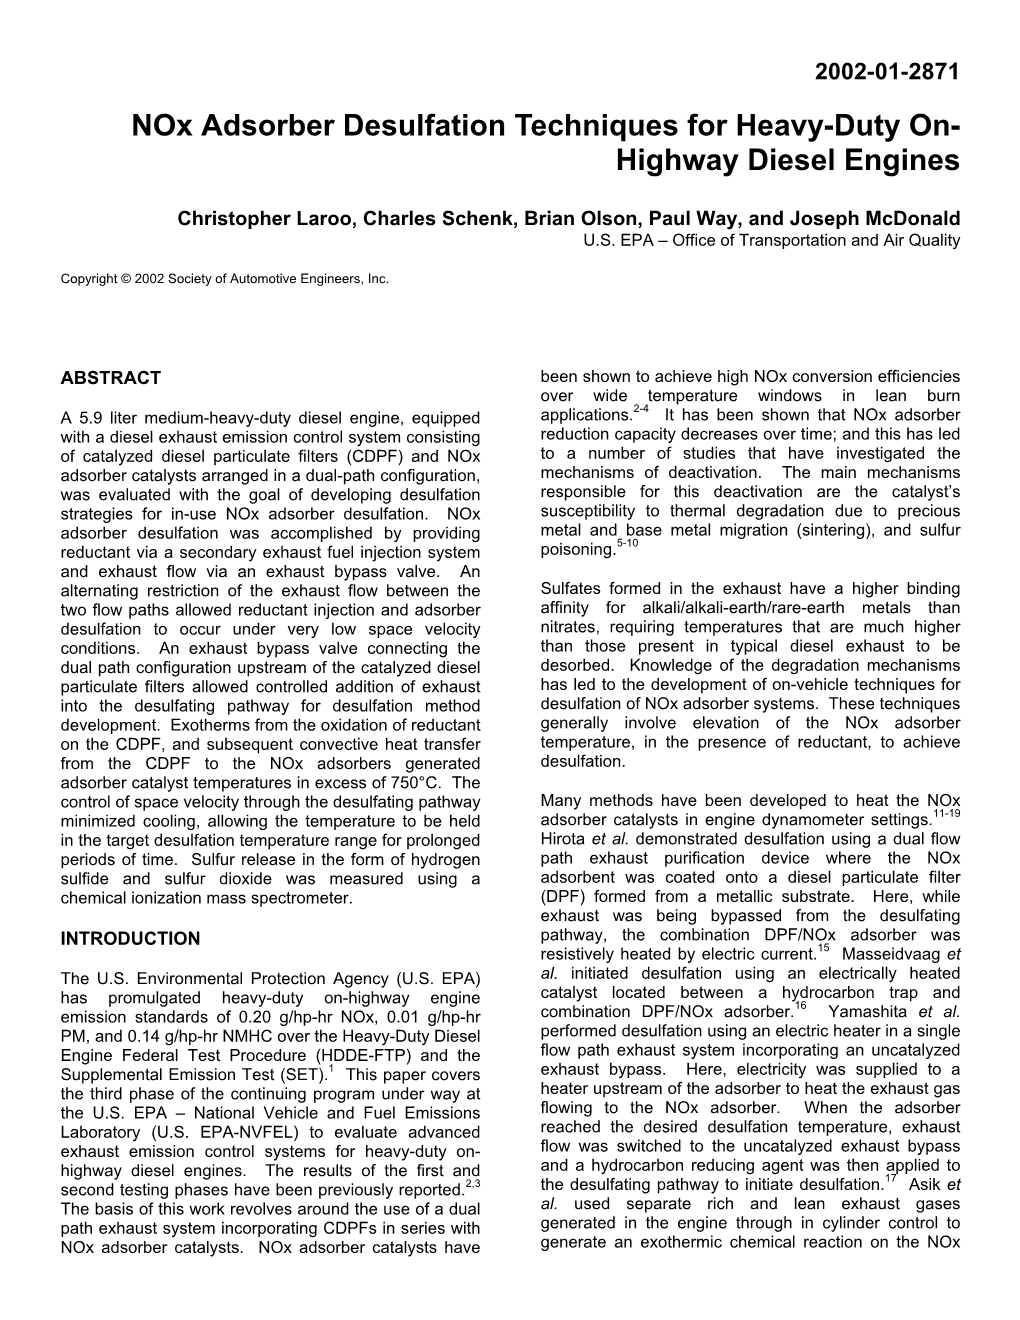 Nox Adsorber Desulfation Techniques for Heavy-Duty On- Highway Diesel Engines